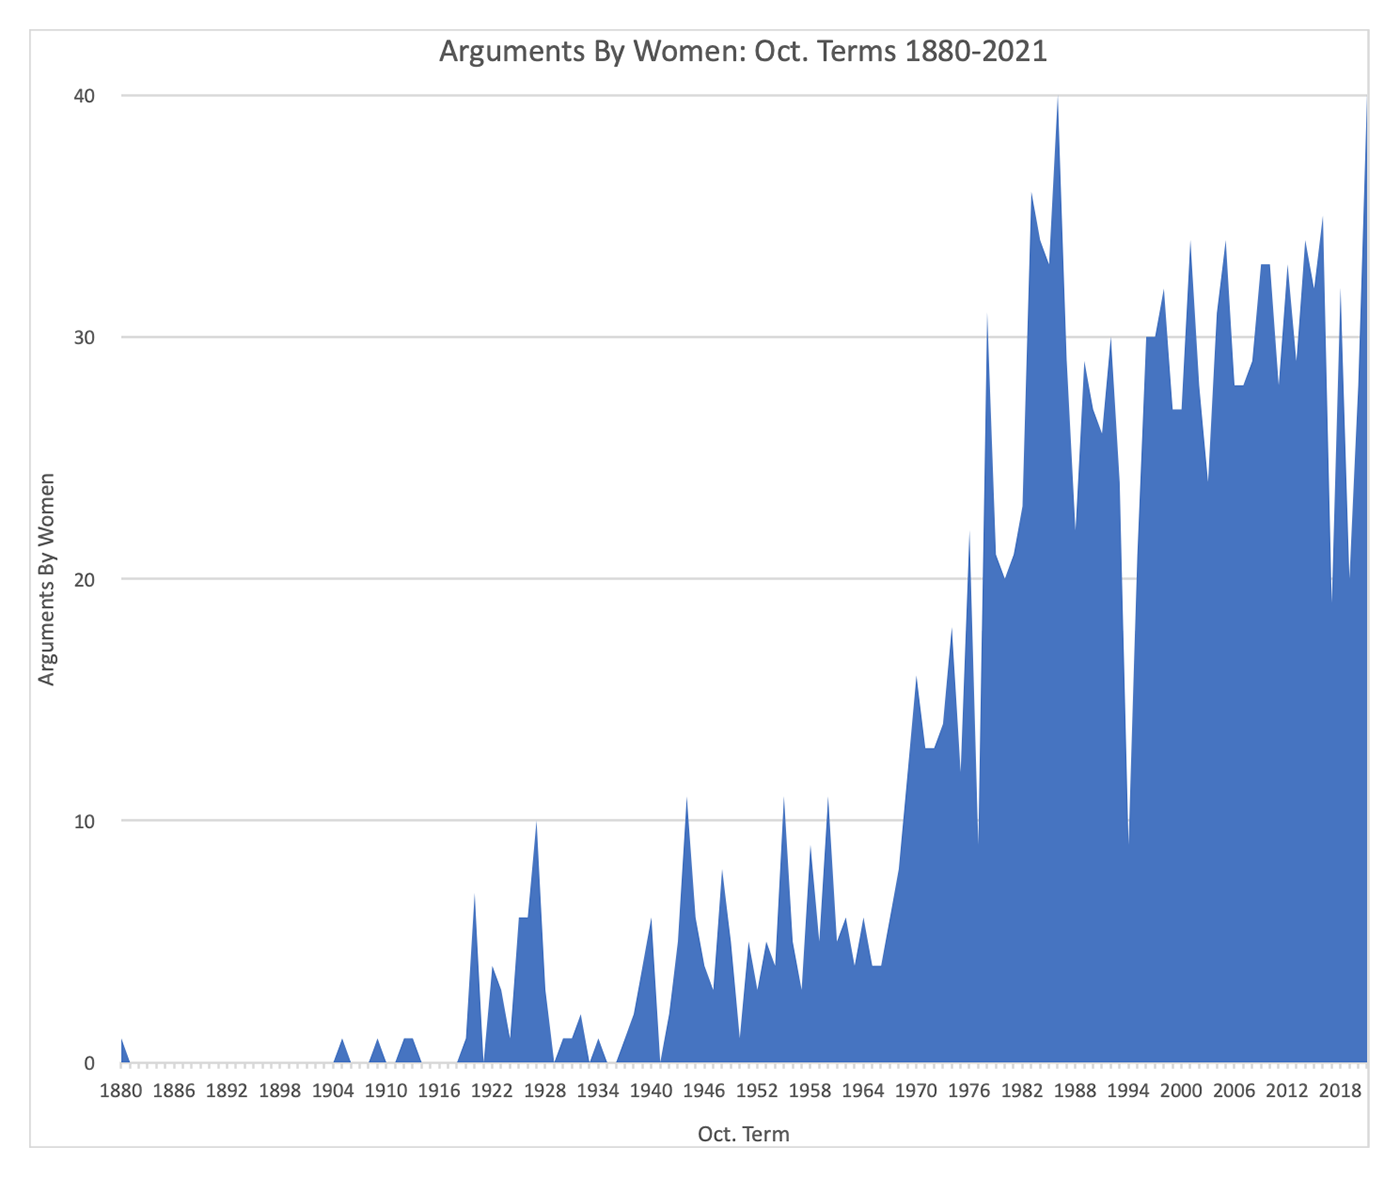 Women Advocates: Arguments By Women, October Terms 1880-2021